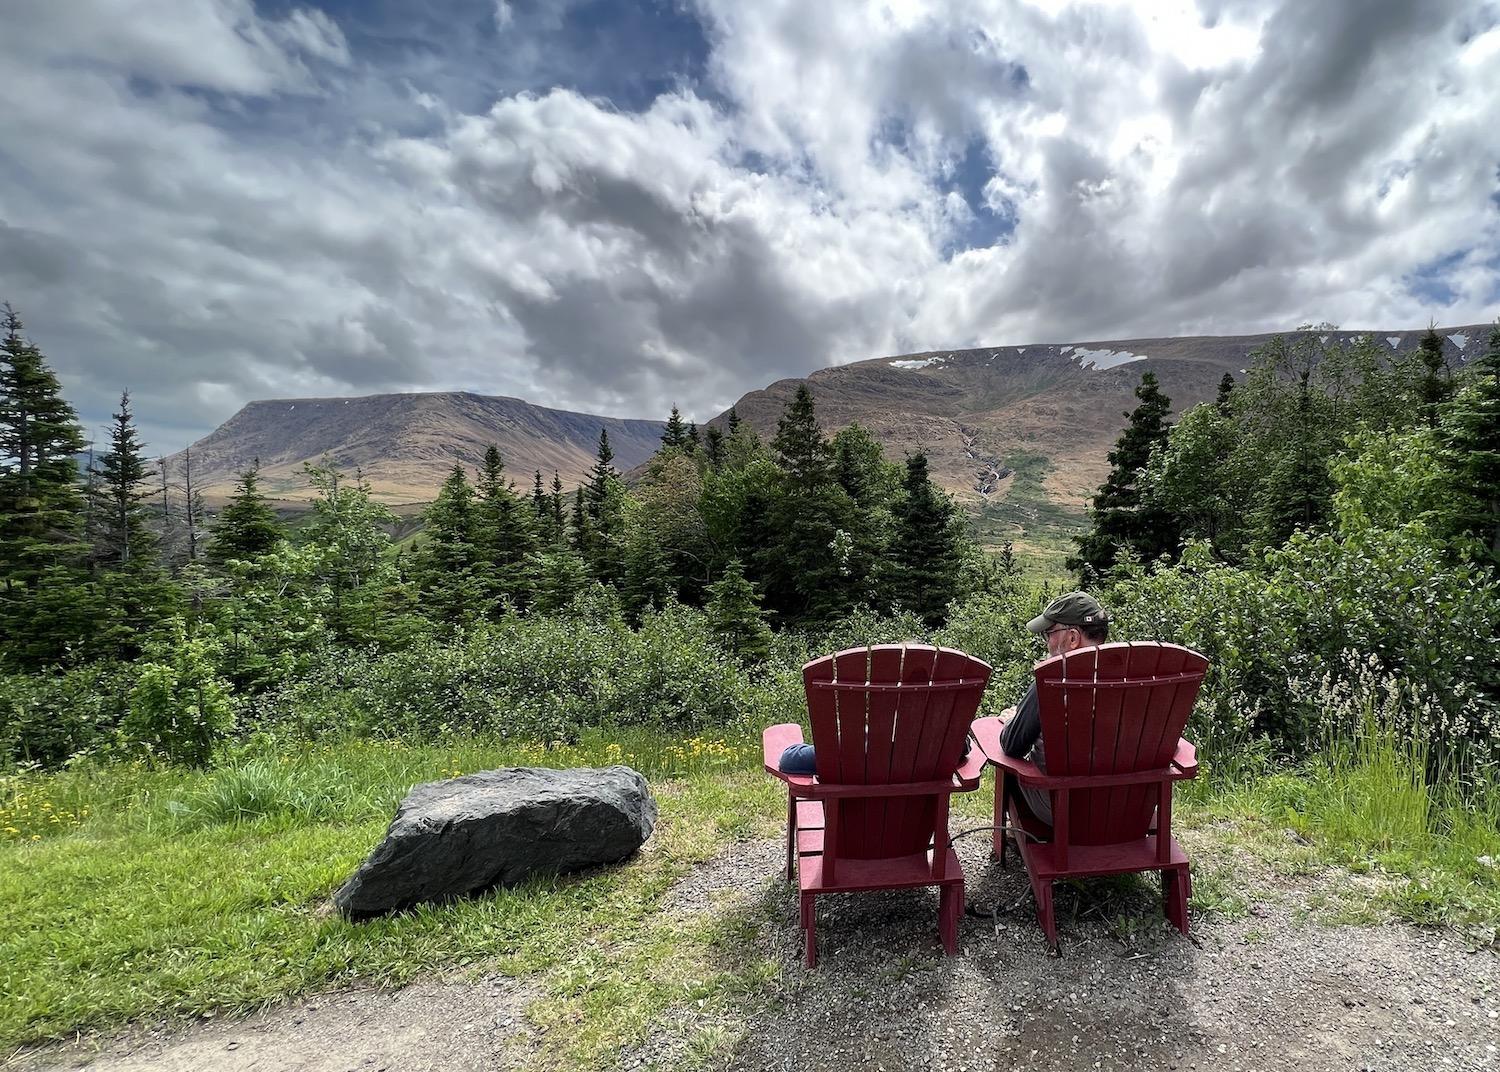 A pullout along Route 431 (Bonne Bay Road) has two Parks Canada red chairs and views of the Tablelands.